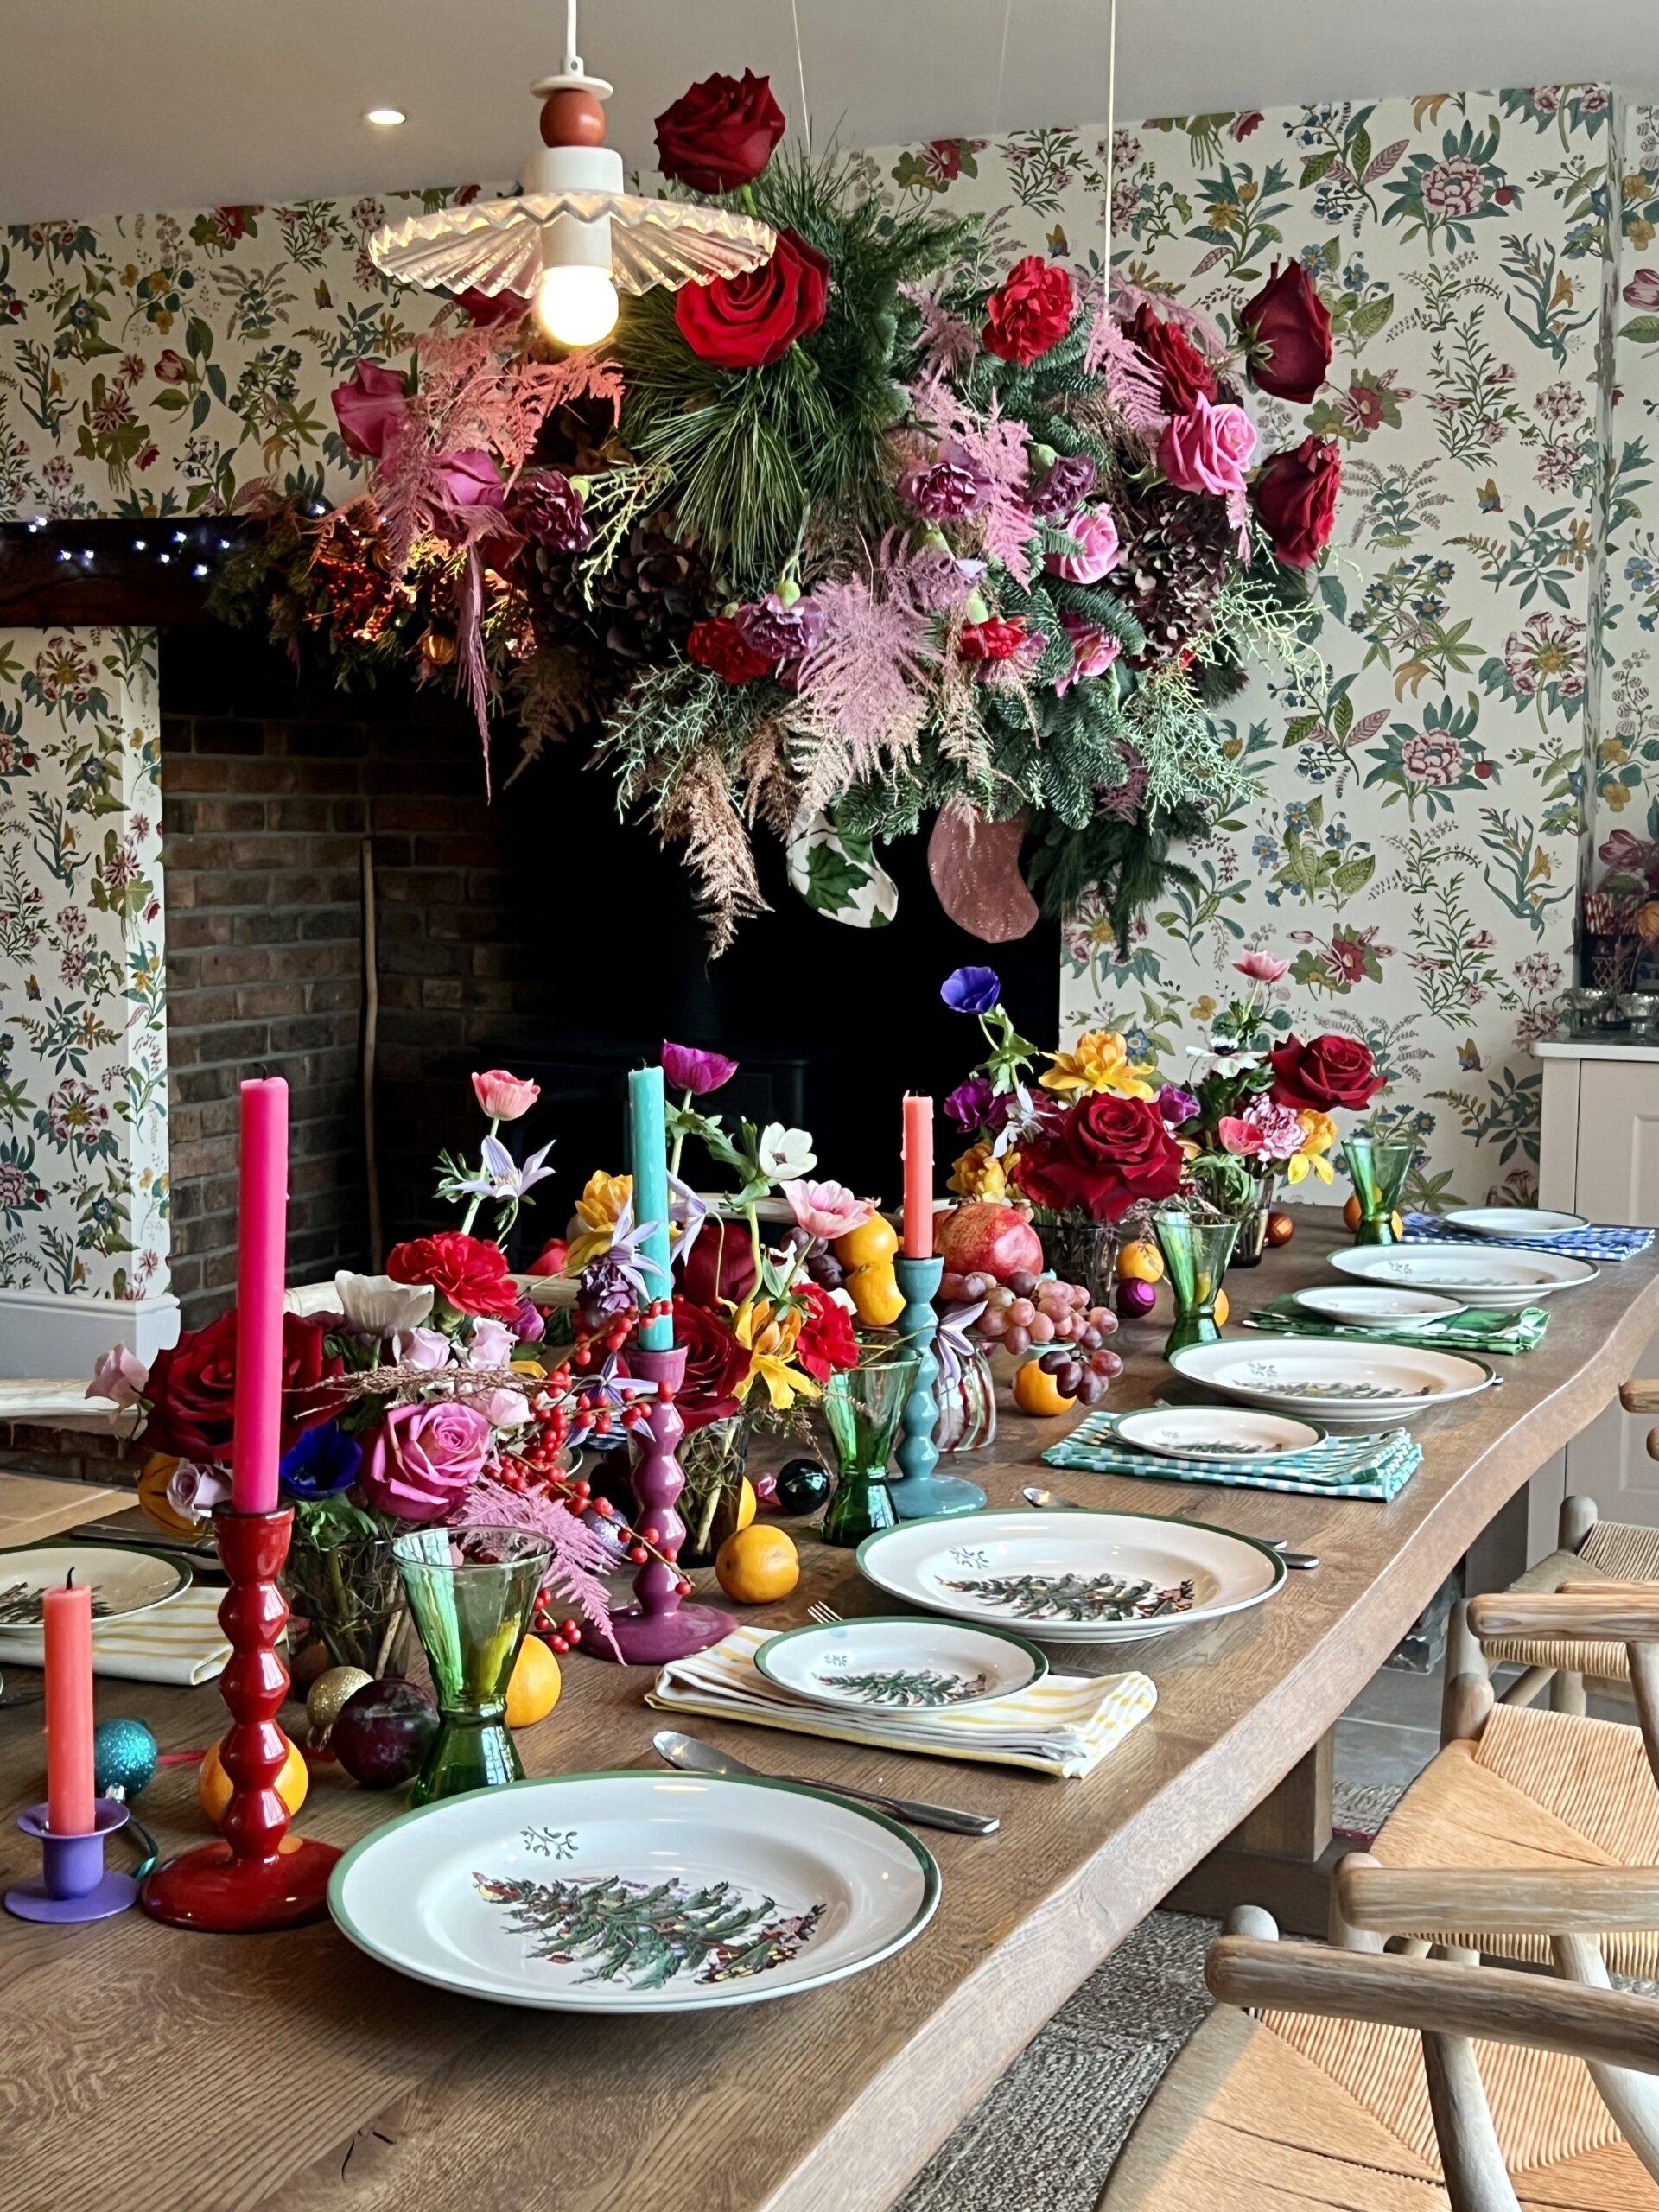 Colourful Christmas tablescape on large wooden table with Spode dinnerware which is white with a green rim and Christmas tree in the centre. Above the table hangs an extravagant foliage cloud filled with greenery, red roses and pink flowers. The centre of the table is fulled with mini floral displays. bright and colourful candlesticks with fruit and baubles scattered throughout.